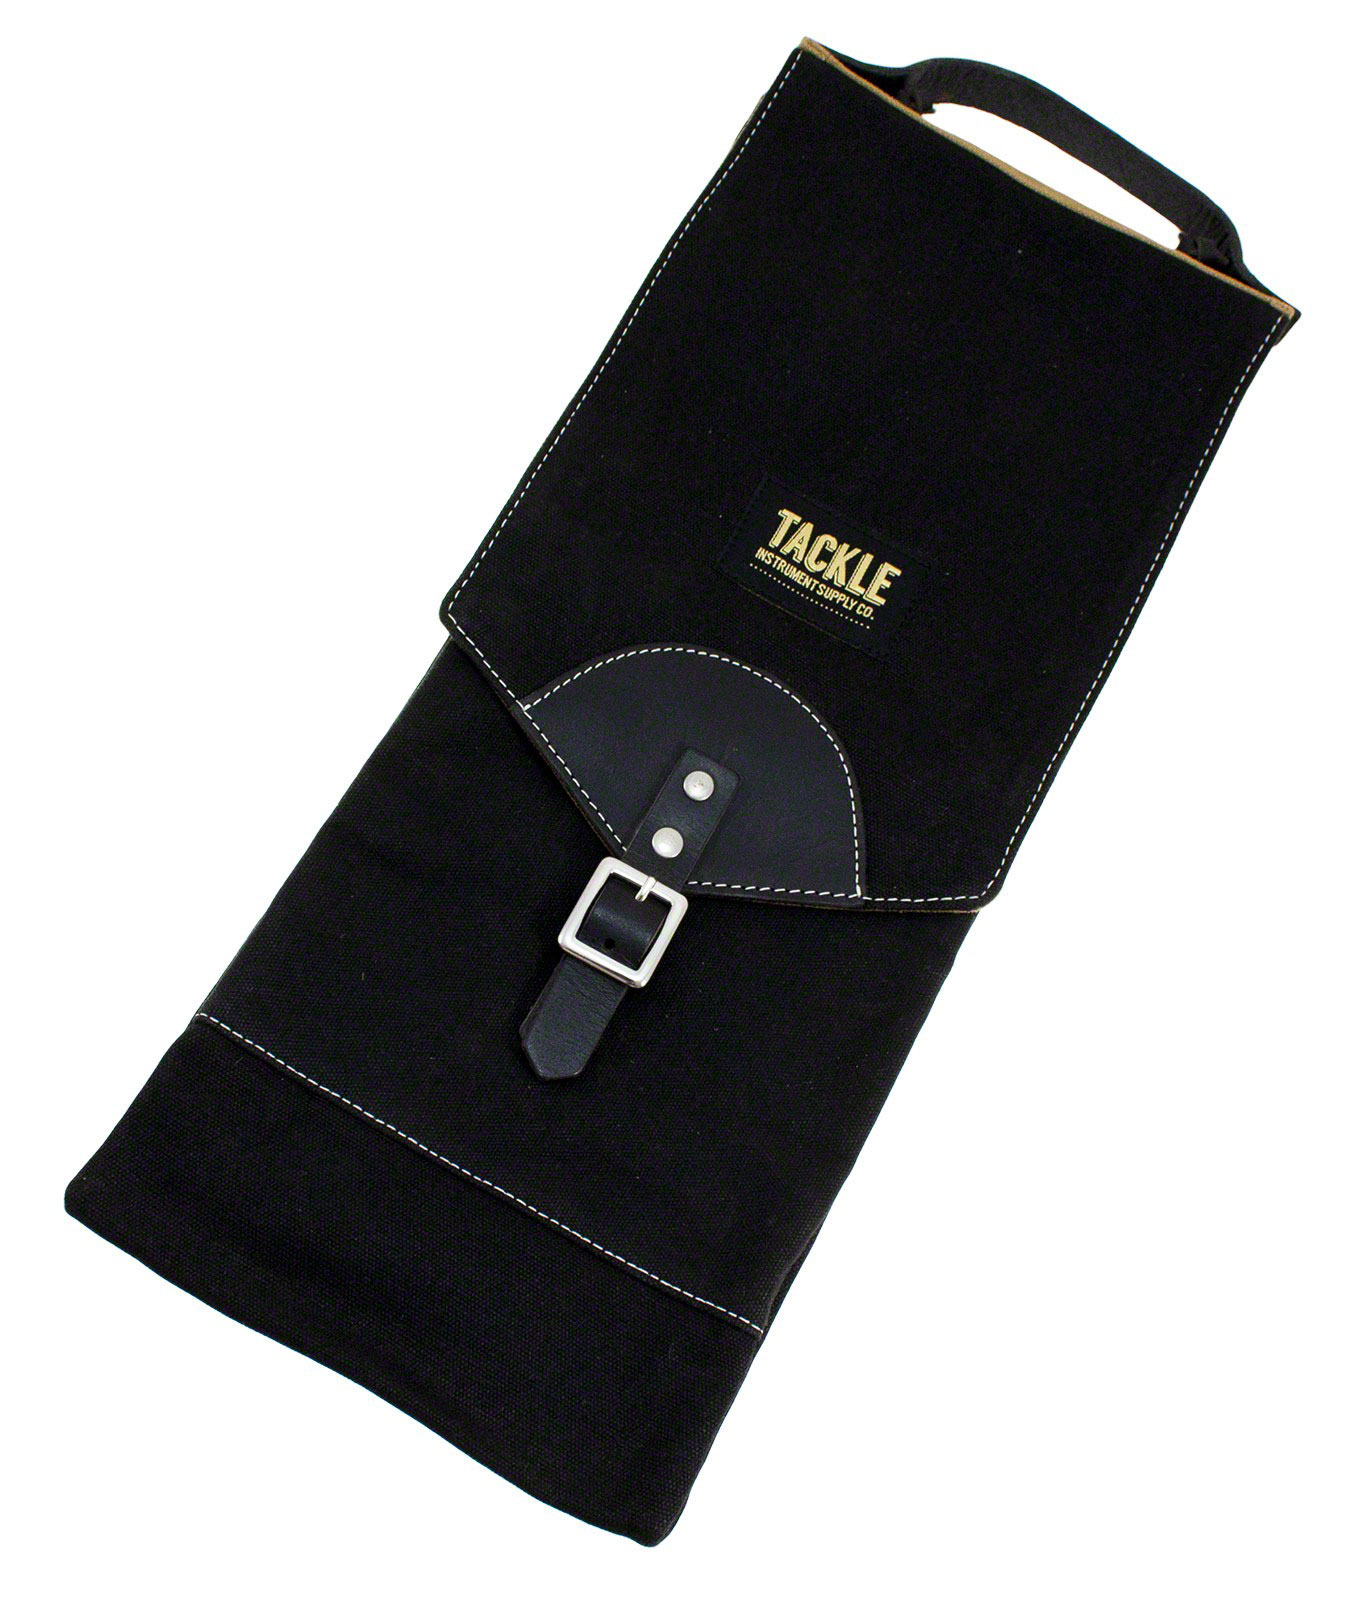 TACKLE INSTRUMENTS WAXED CANVAS COMPACT STICK CASE - BLACK